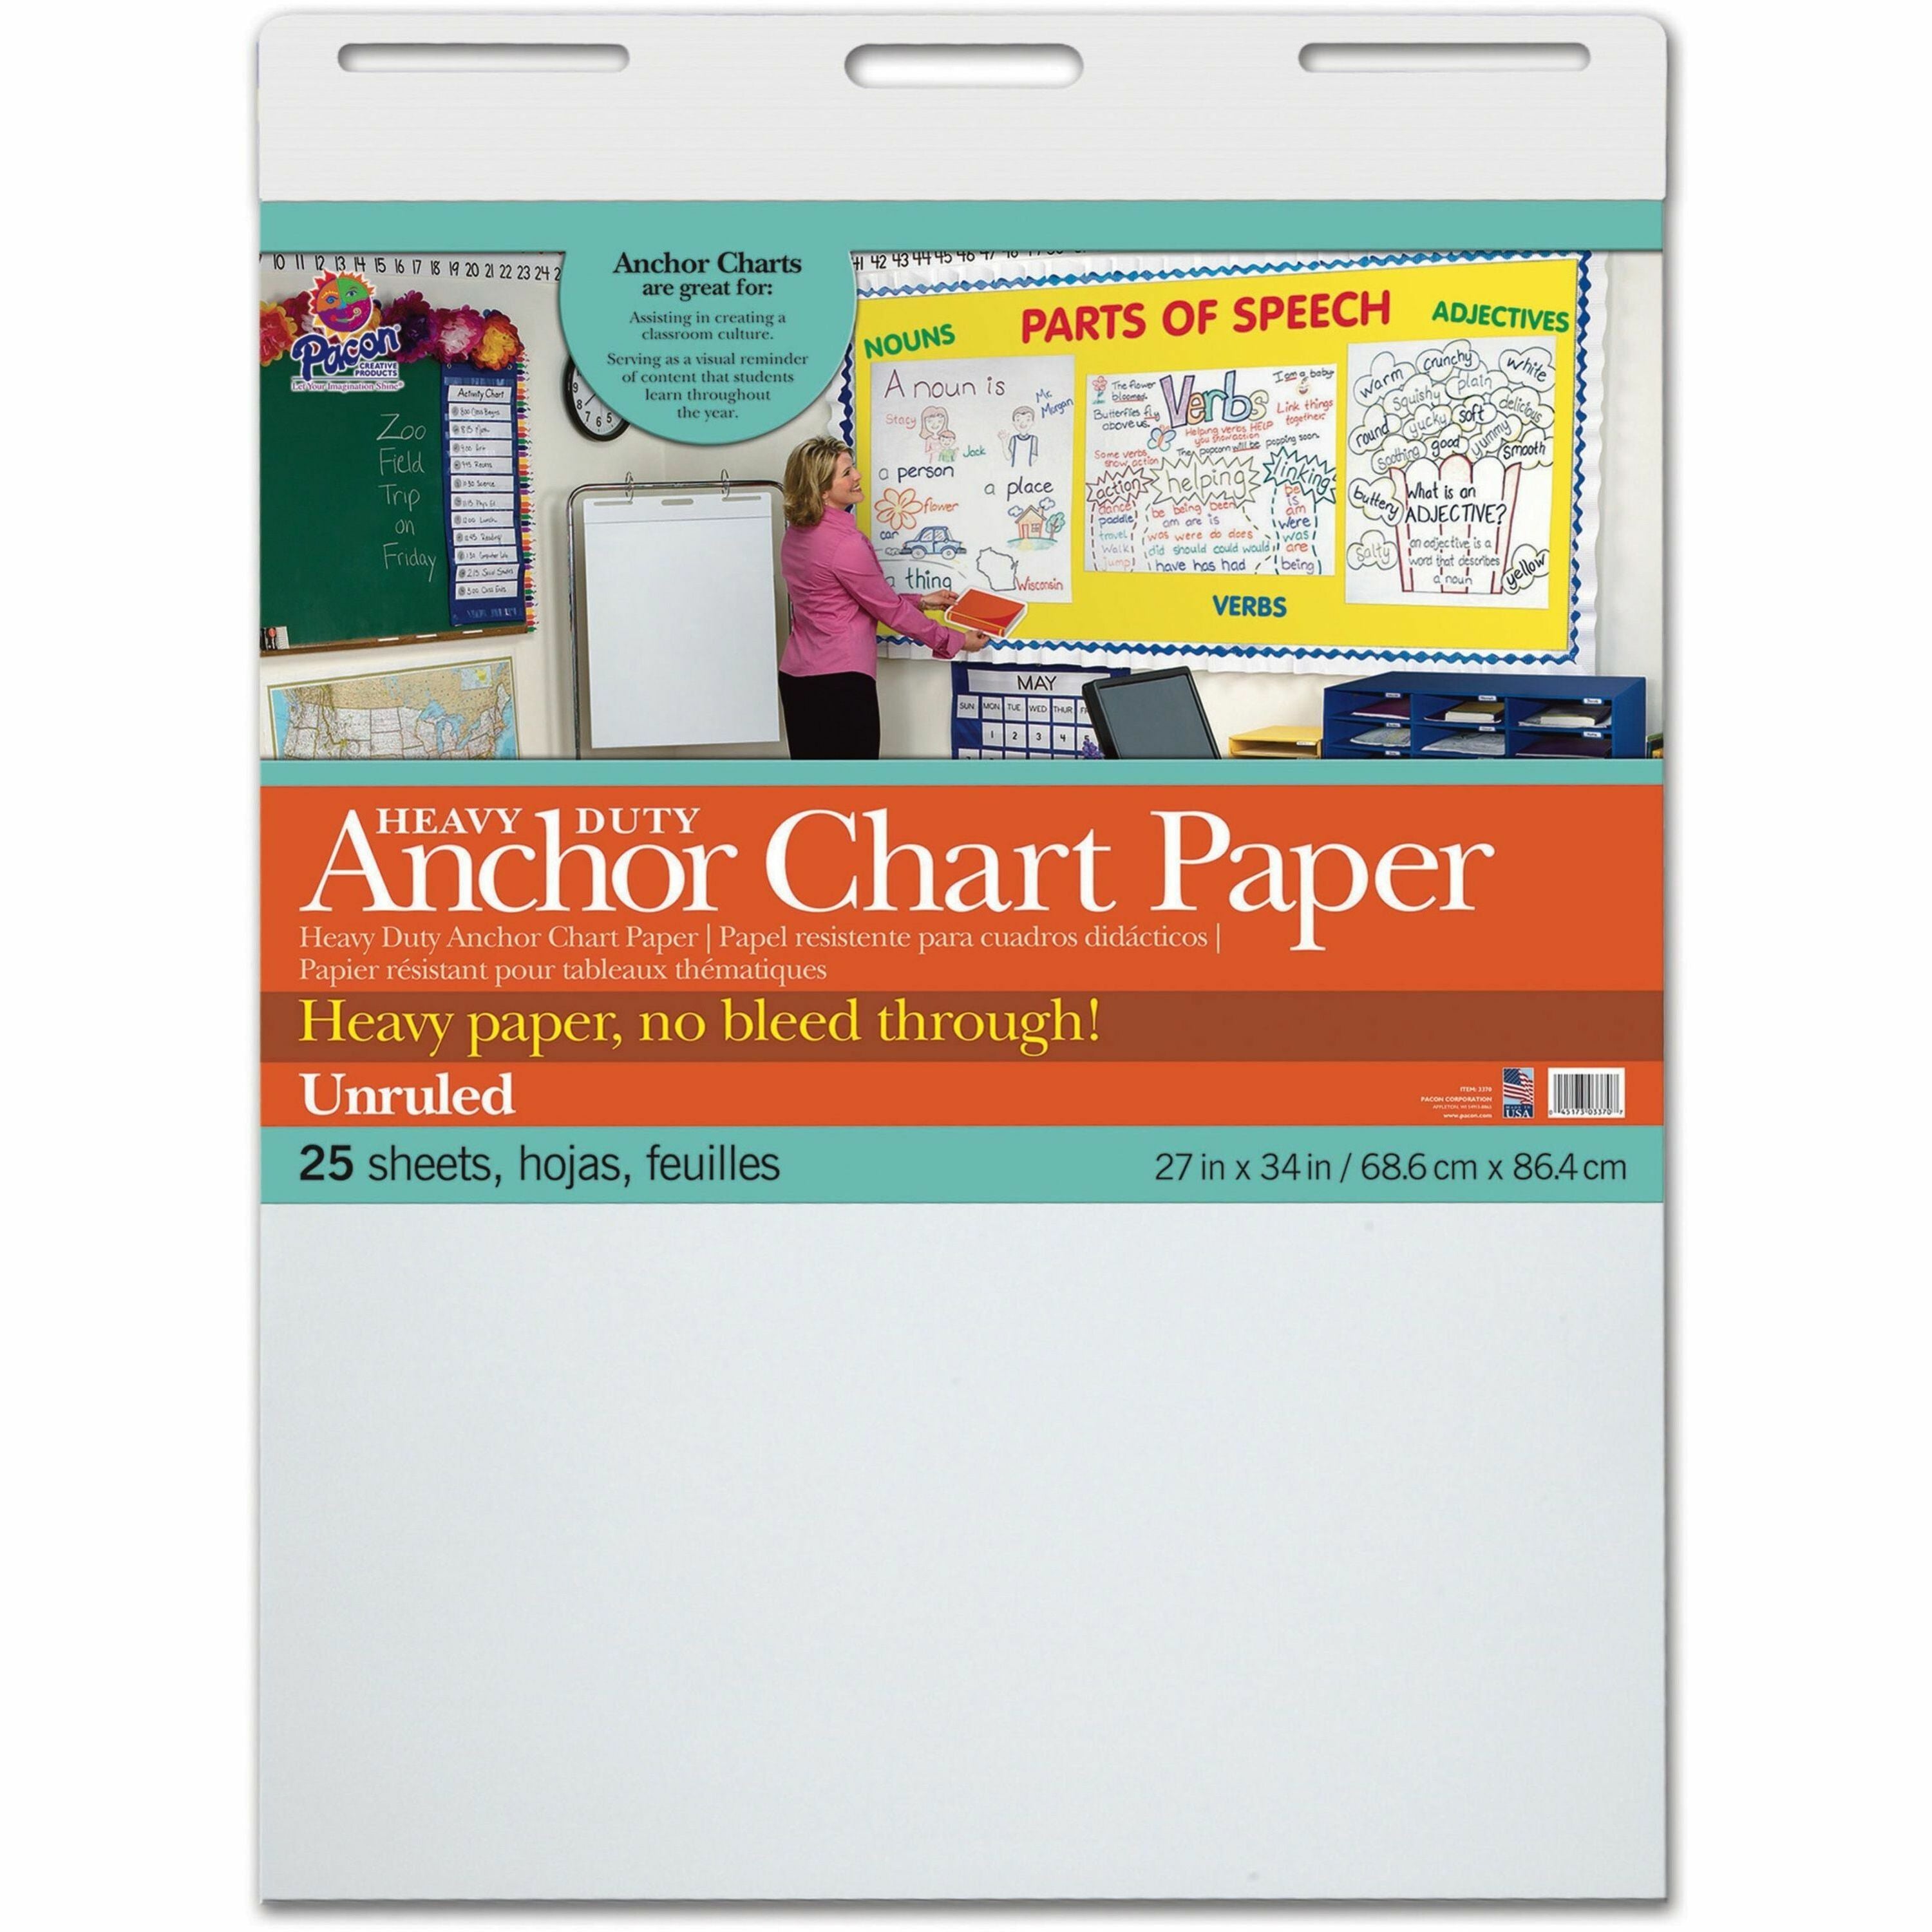 pacon-heavy-duty-anchor-chart-paper-25-sheets-plain-unruled-27-x-34-white-paper-heavy-duty-resist-bleed-through-recyclable-built-in-carry-handle-4-carton_pac3370 - 1